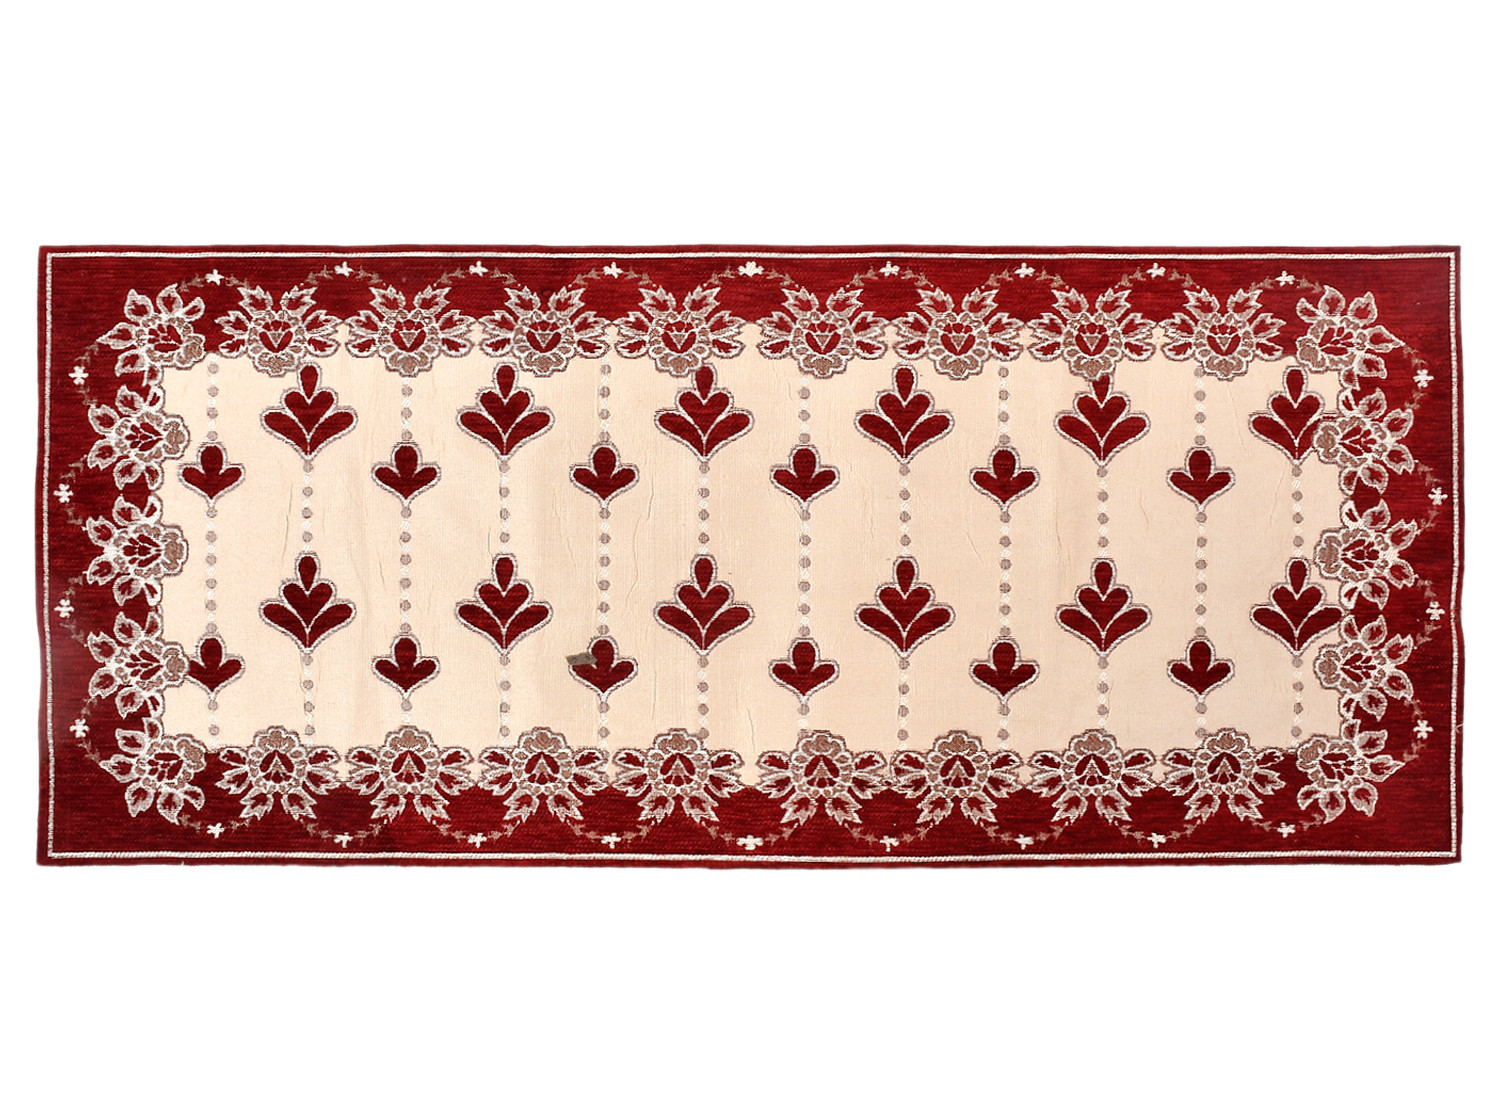 Kuber Industries Multiuses Floral Print Rectangular Cotton Table Runner for Dining and Center Table (Maroon)